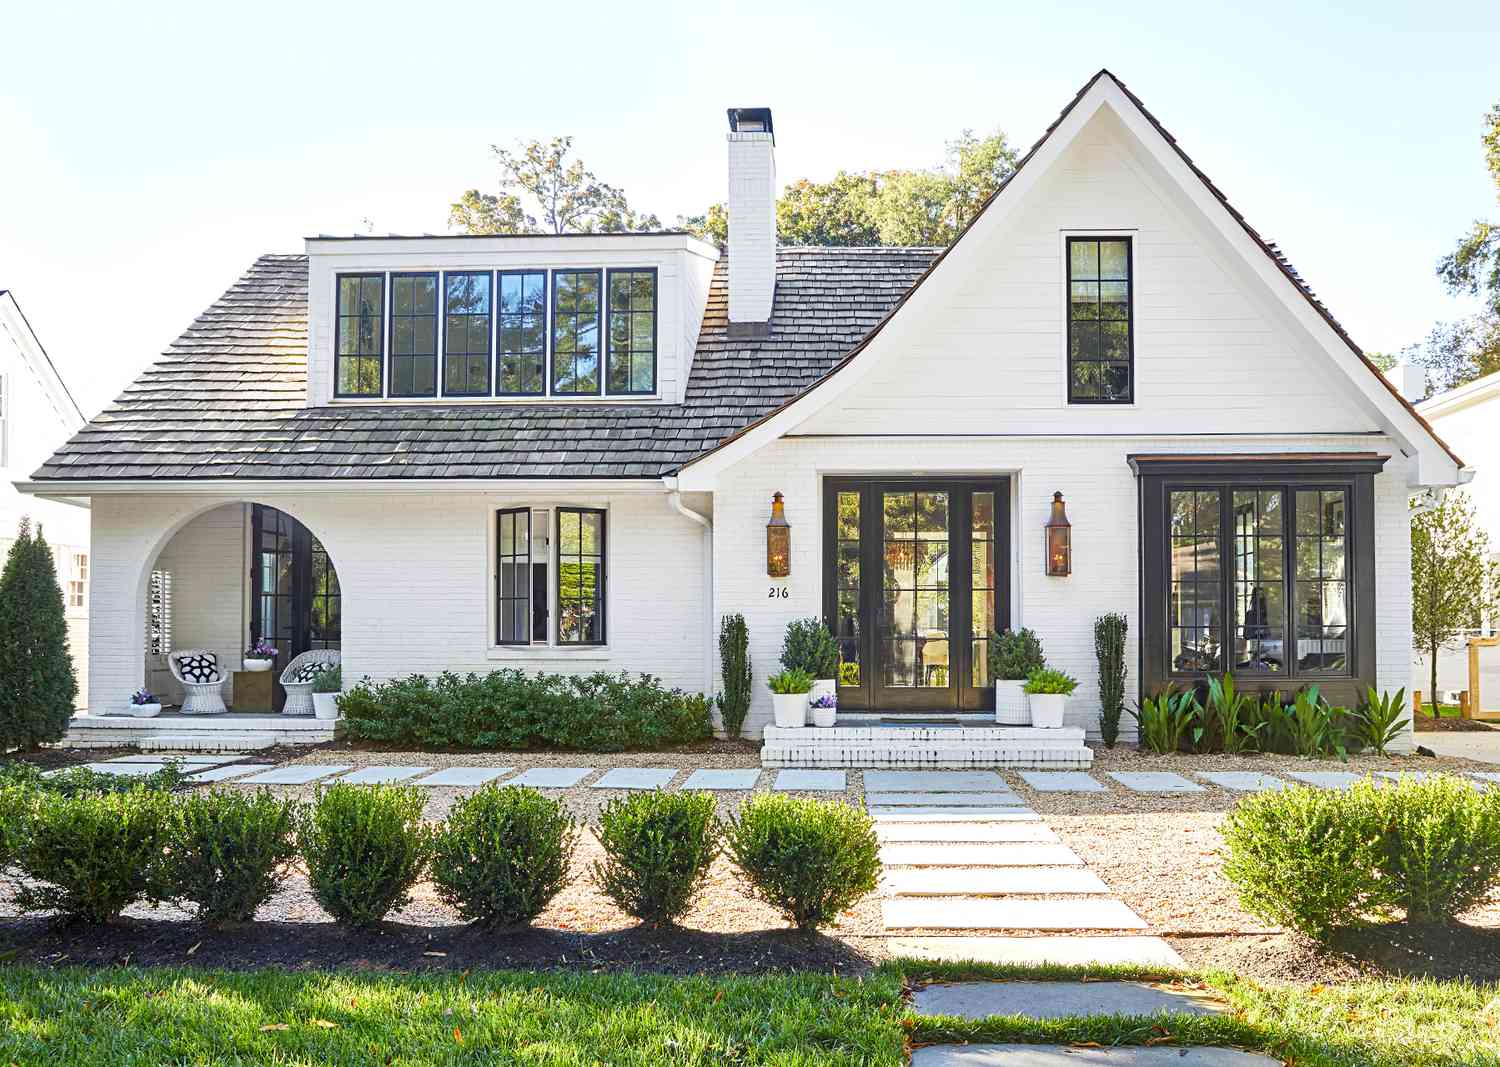 10 Of The Most Popular Home Styles